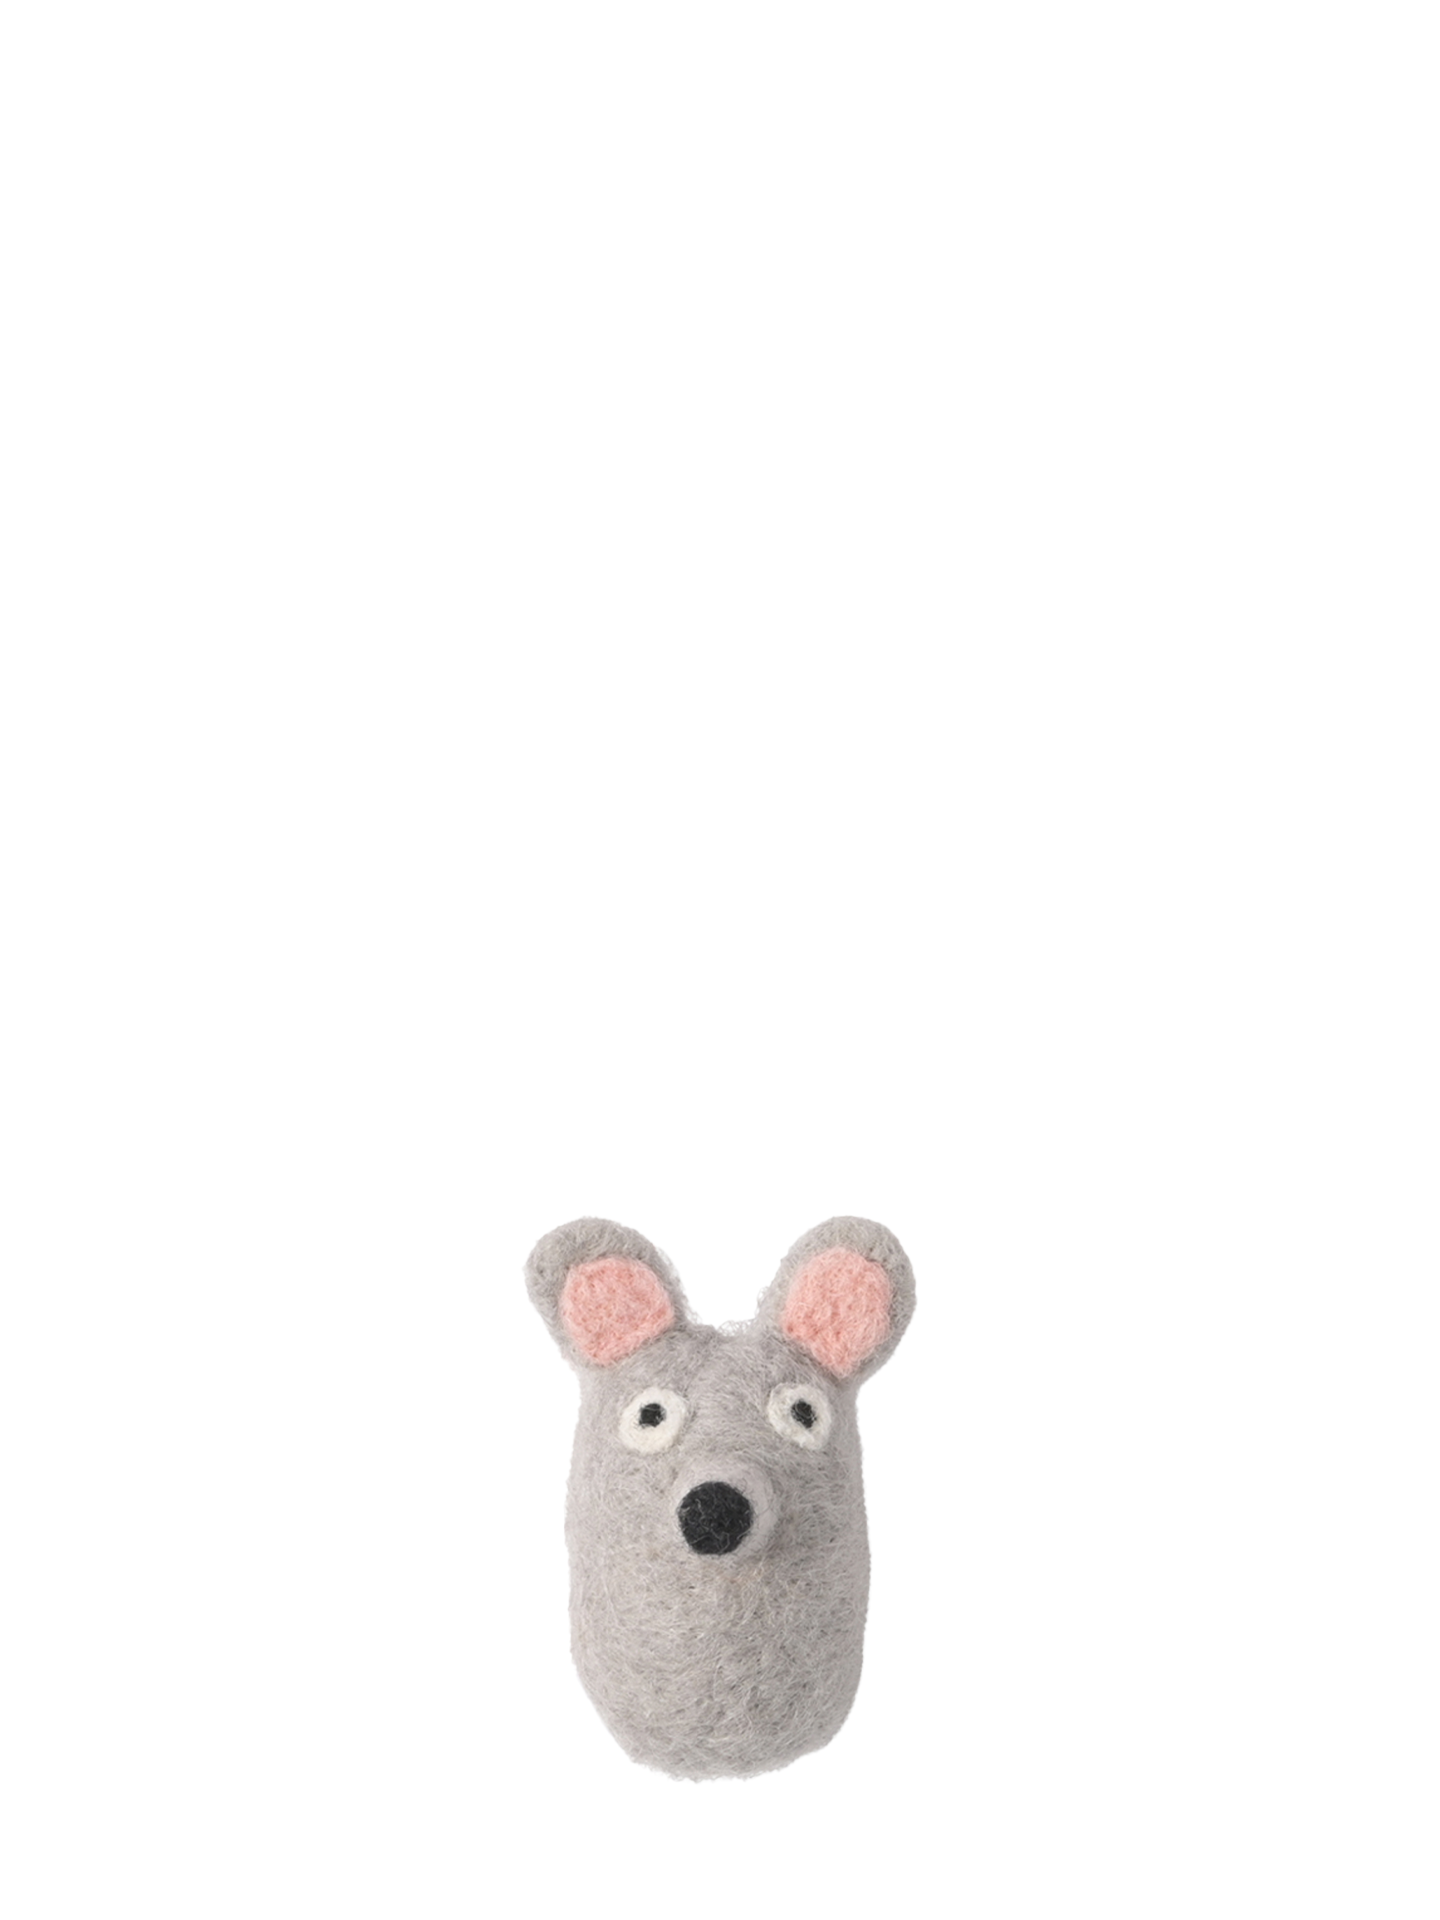 Woollen mouse hanging ornament